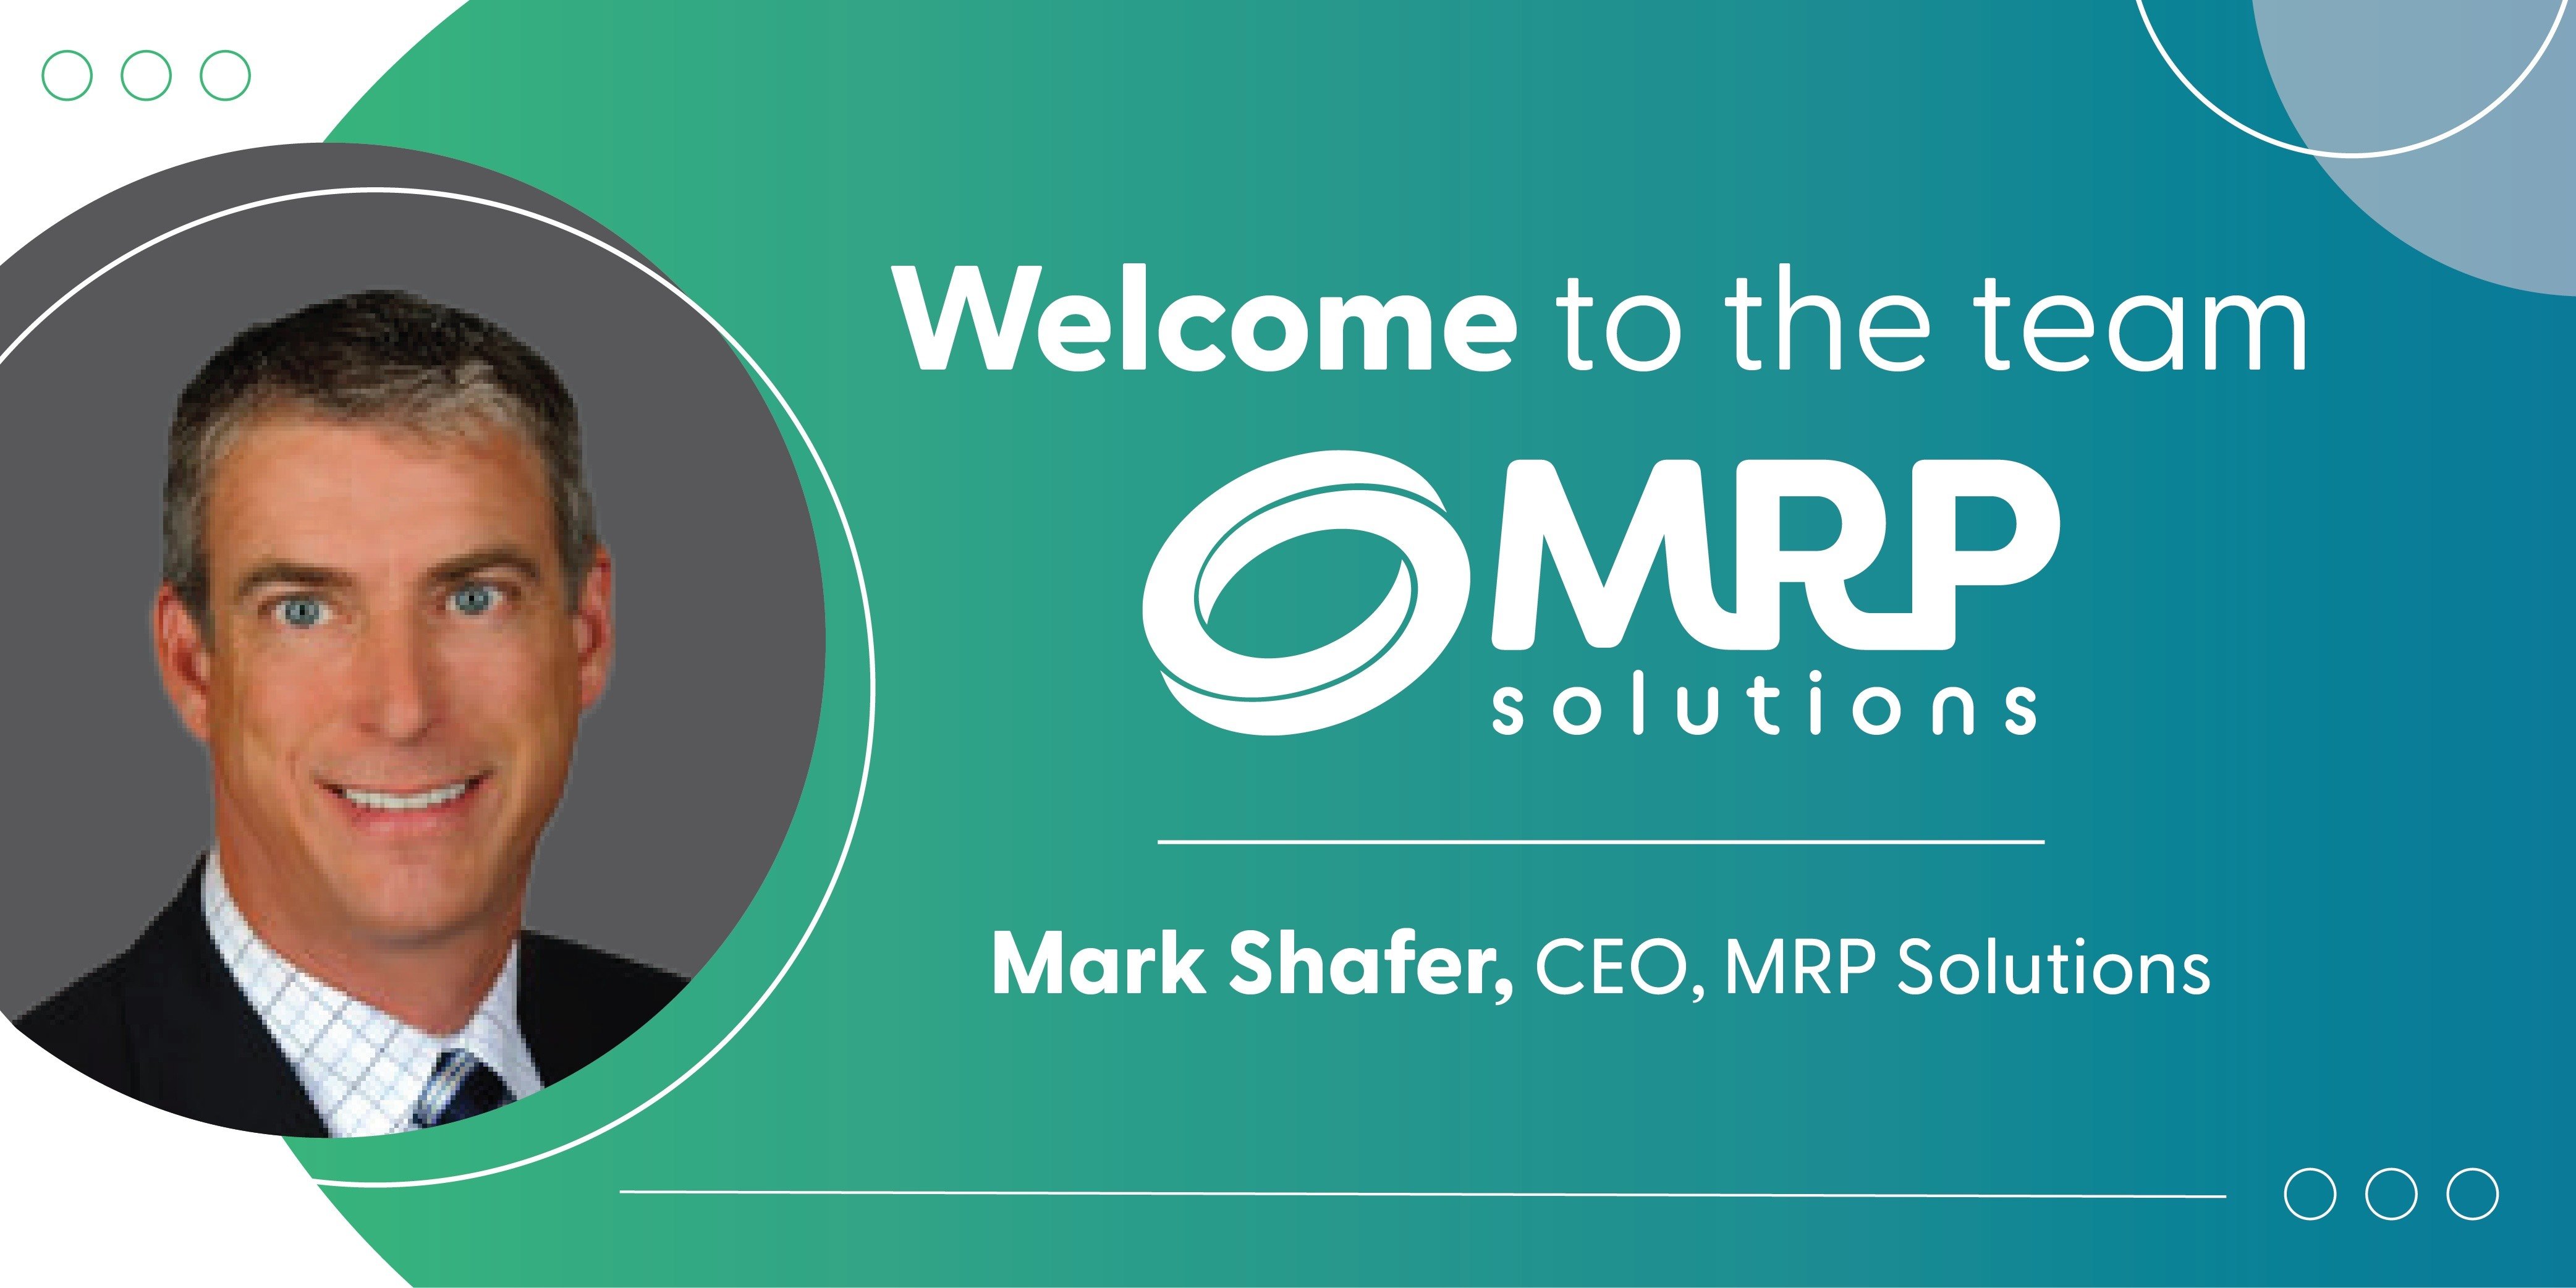 MRP Solutions Welcomes New CEO, Mark Shafer